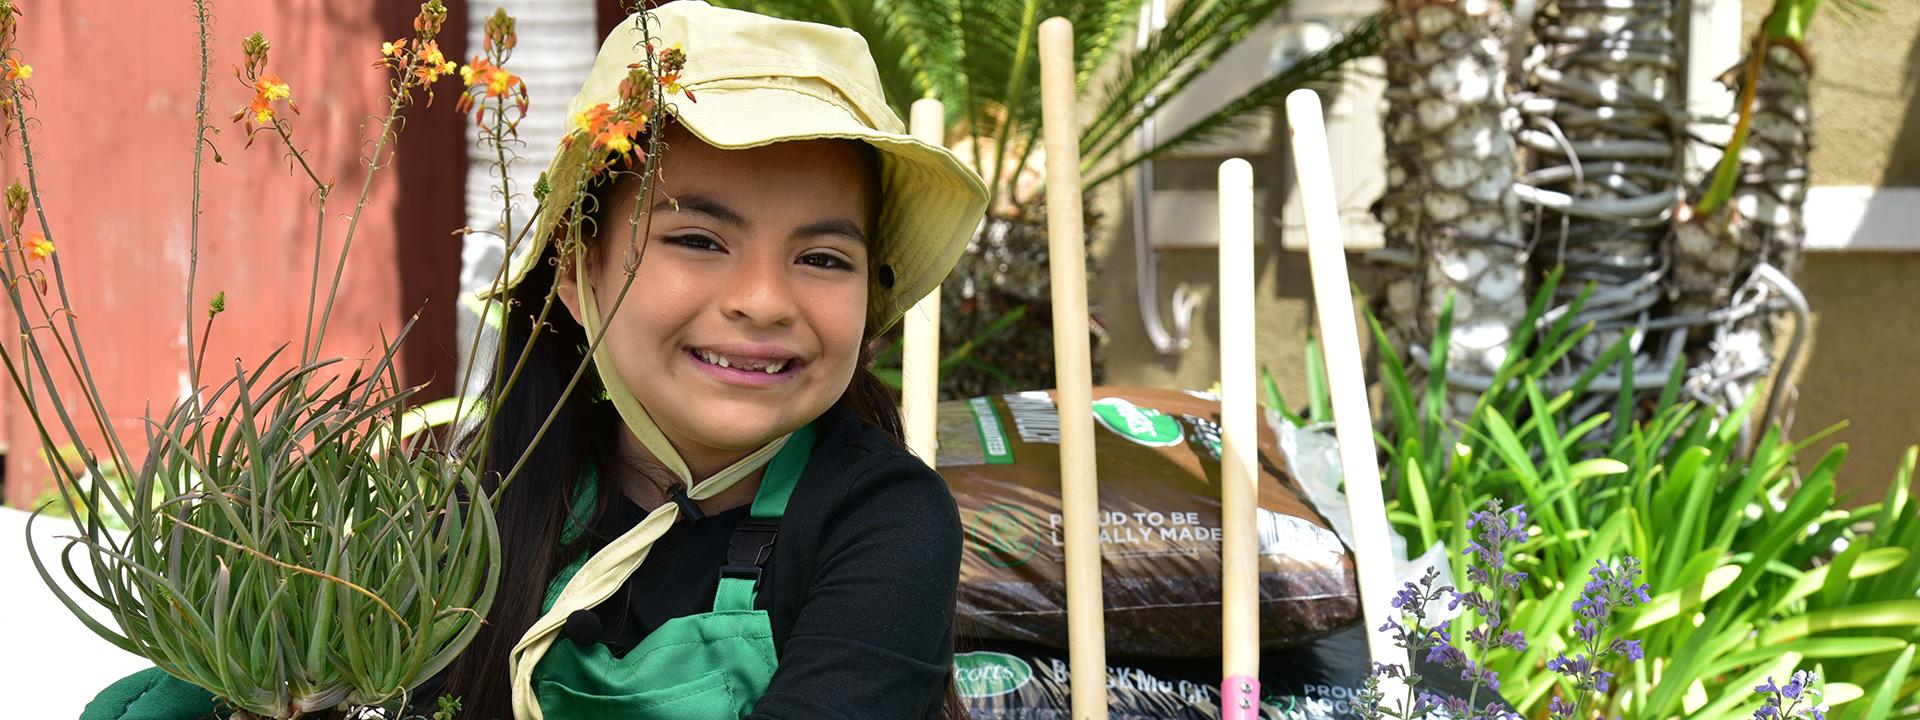 Child smiling wearing sunhat and gloves holding potted plant